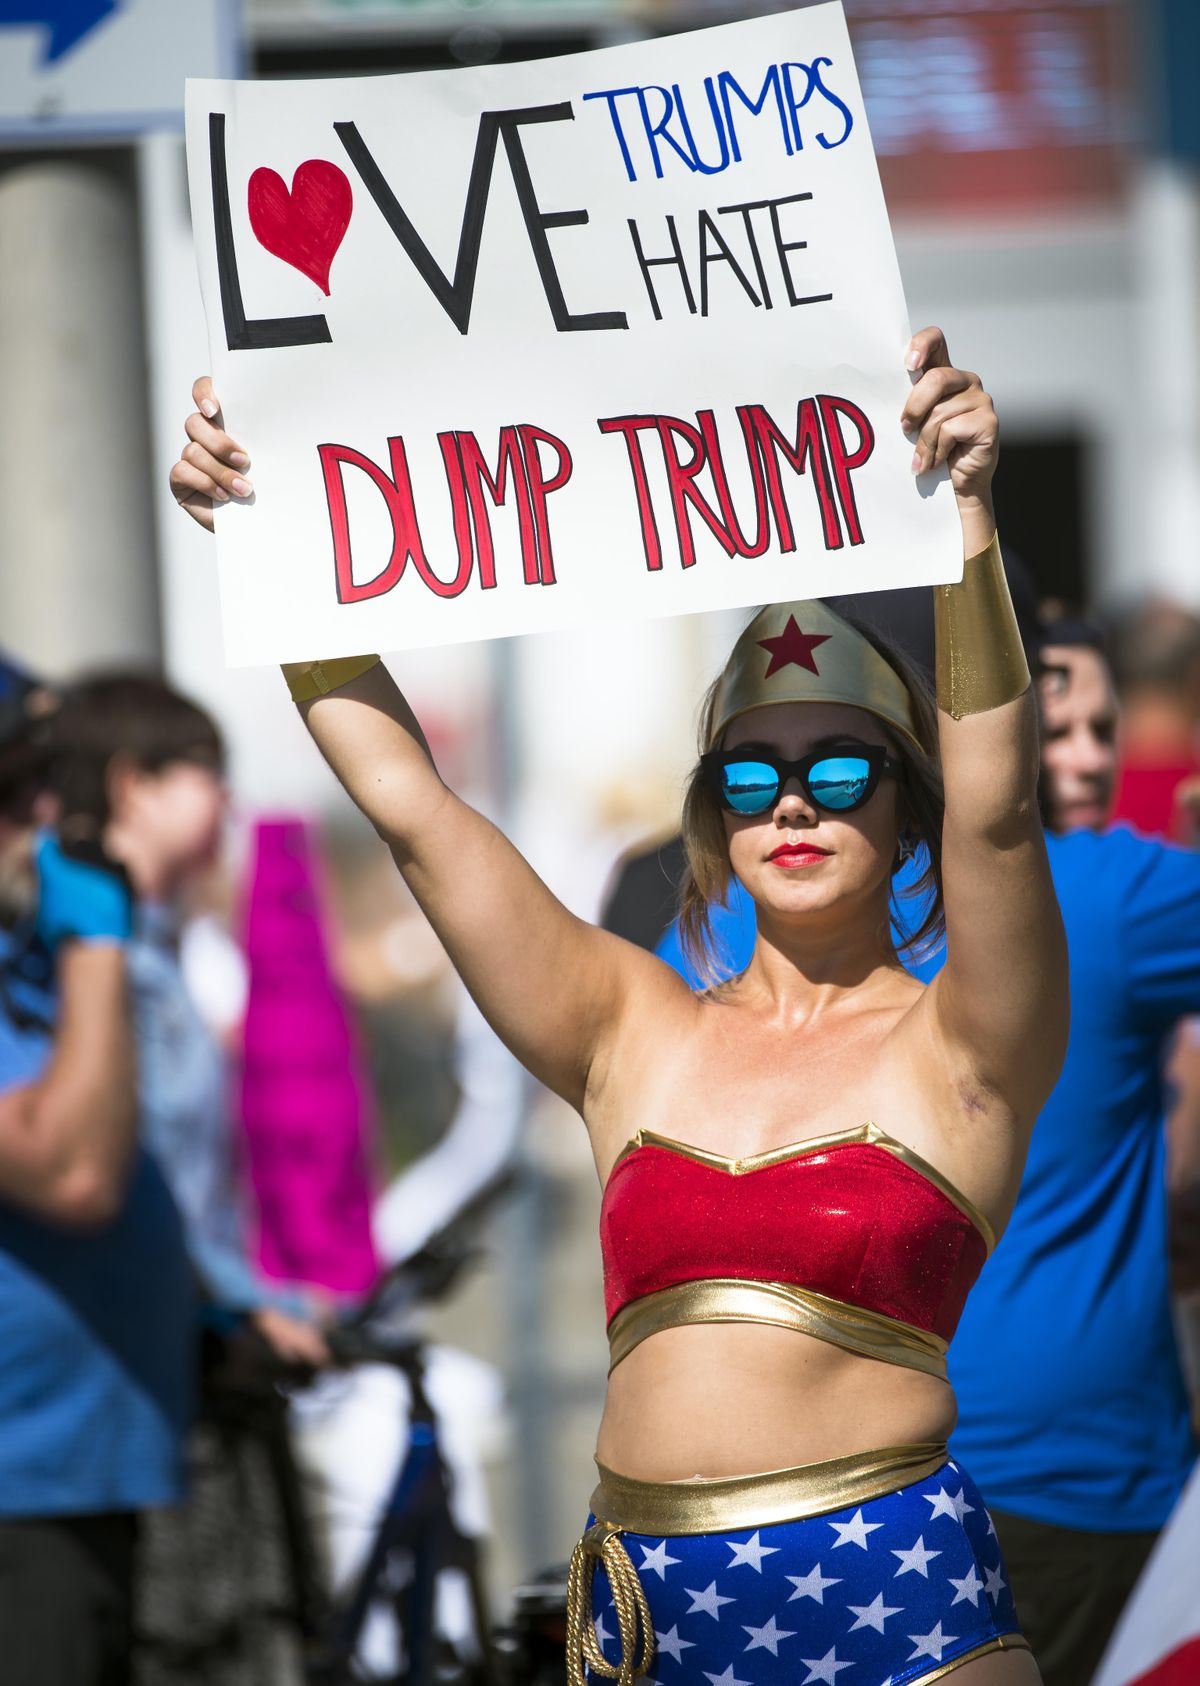 Wonder Woman (Cam Zorrozua) holds up a sign outside the Donald Trump rally at the Spokane Convention Center in Spokane, May 7, 2016. (Colin Mulvany / The Spokesman-Review)